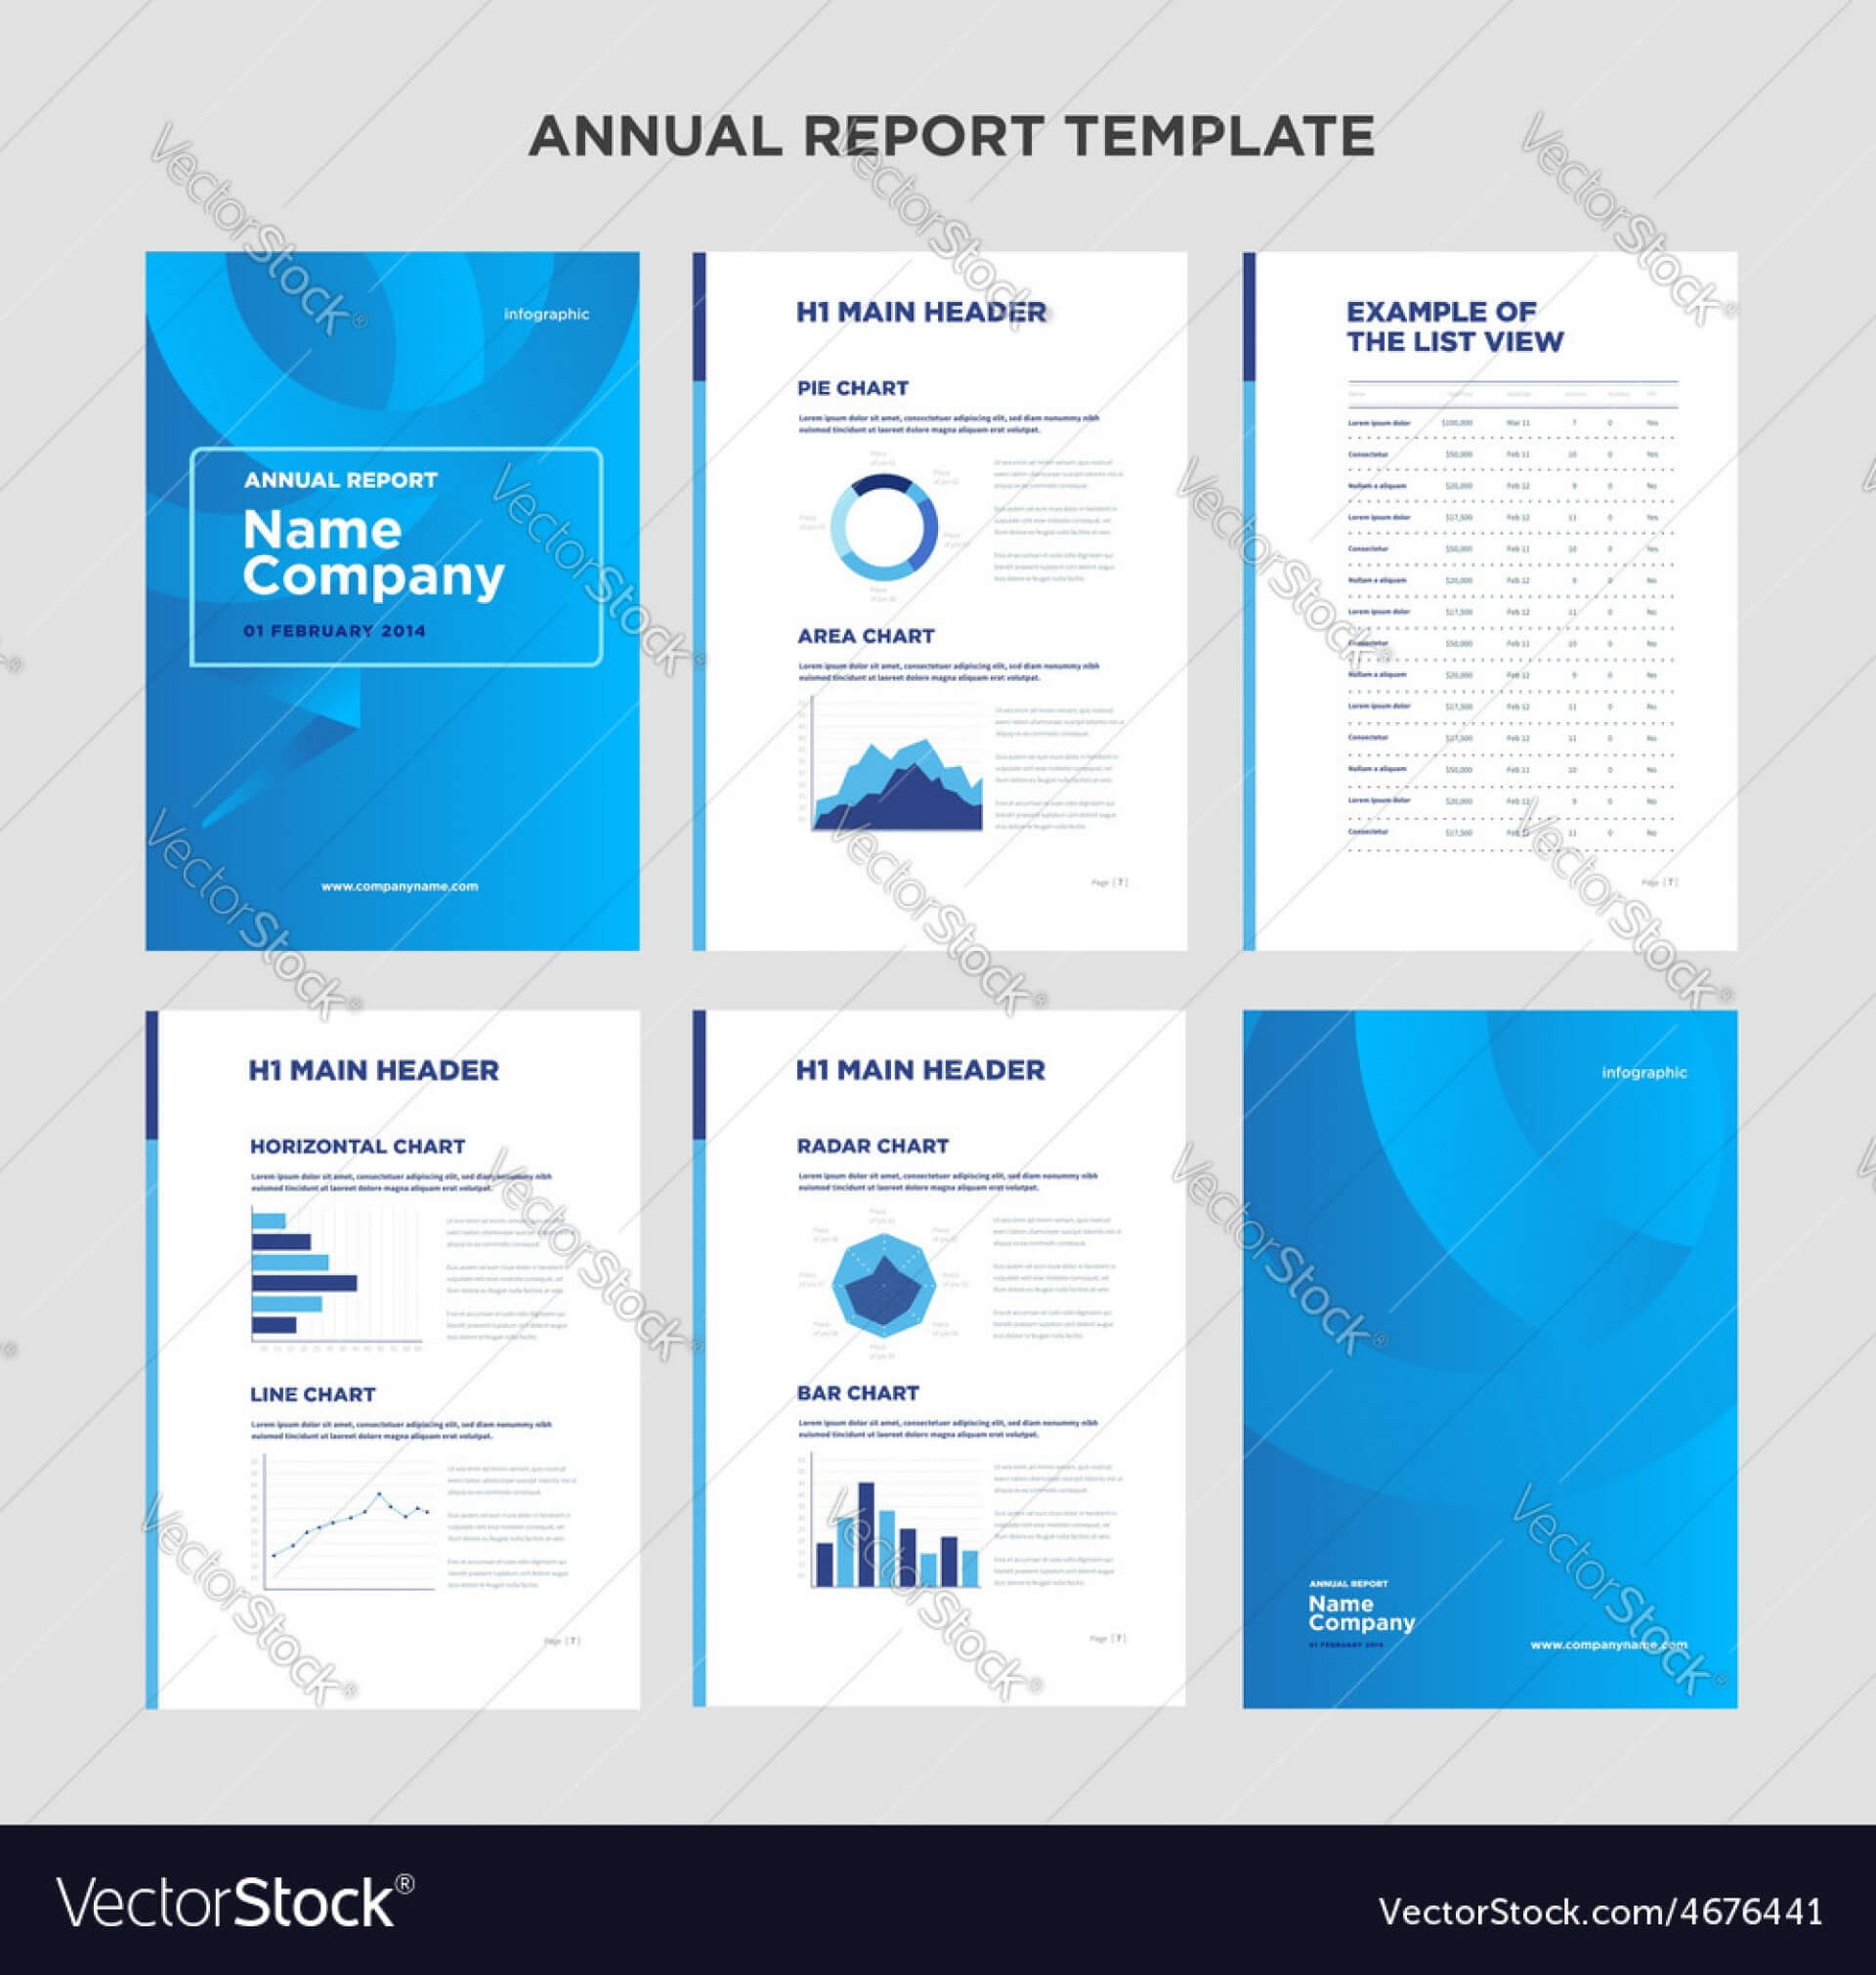 005 Annual Report Template Word Ideas Modern Fearsome Free With Regard To Hr Annual Report Template